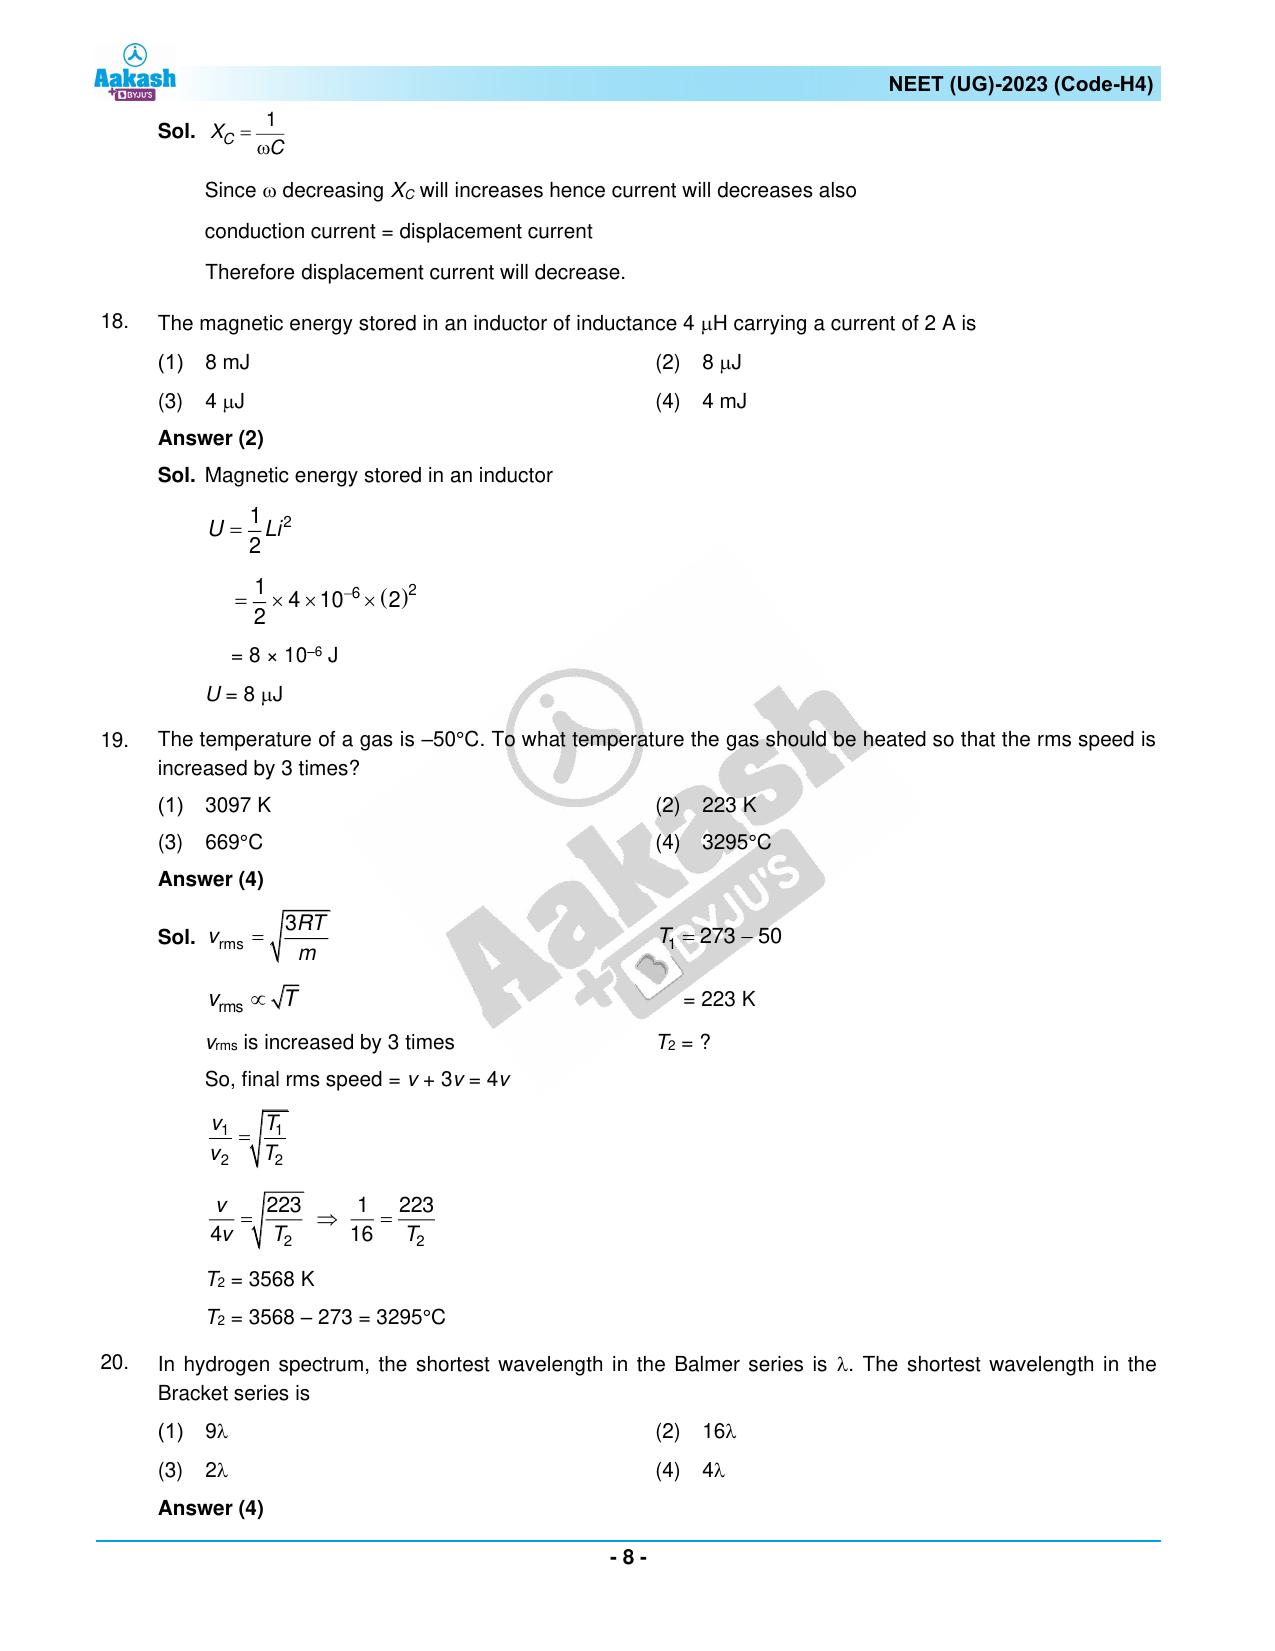 NEET 2023 Question Paper H4 - Page 8